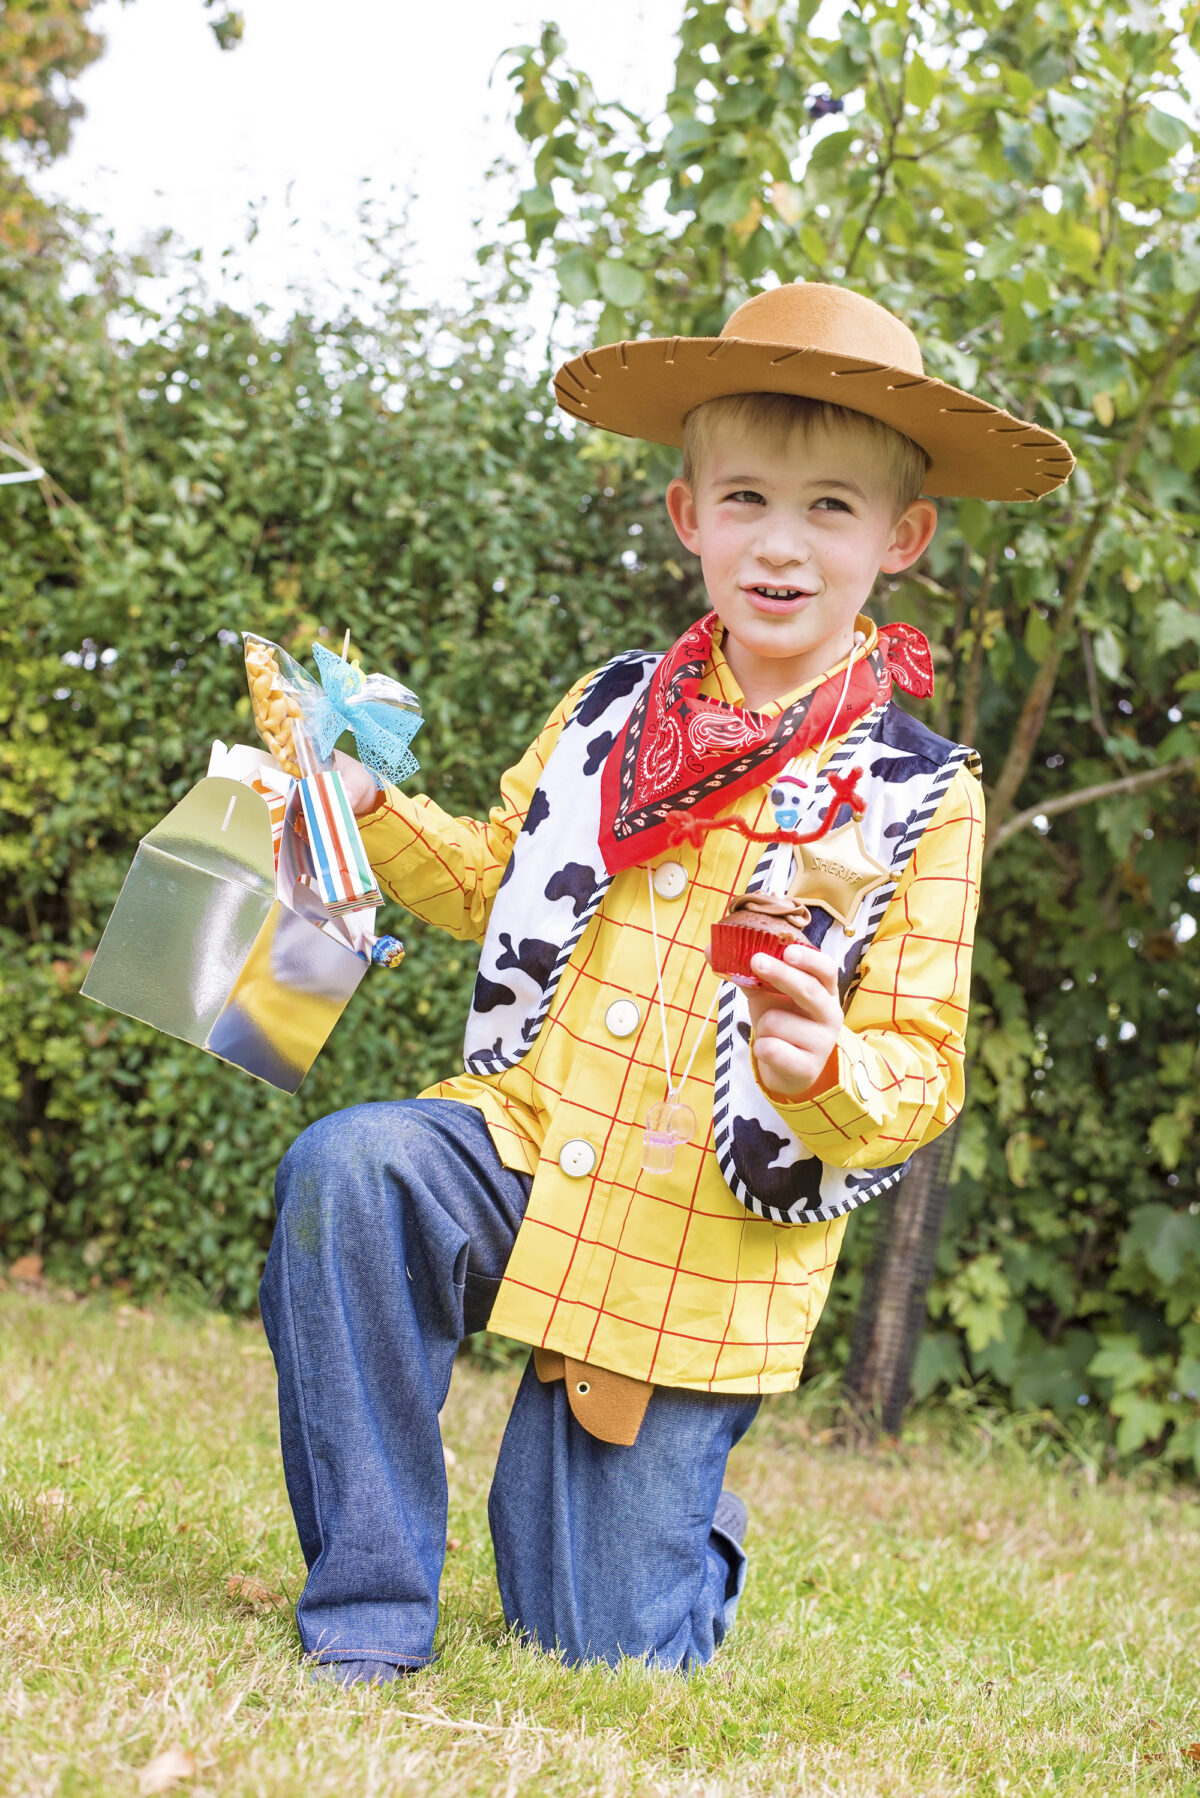 Image shows a member of the Jones Famiily dressed as Woody from Disney's Toy Story and holding a Forky cupcake in one hand and a lunchbox themed for Office Giggles McDimples in the other hand.